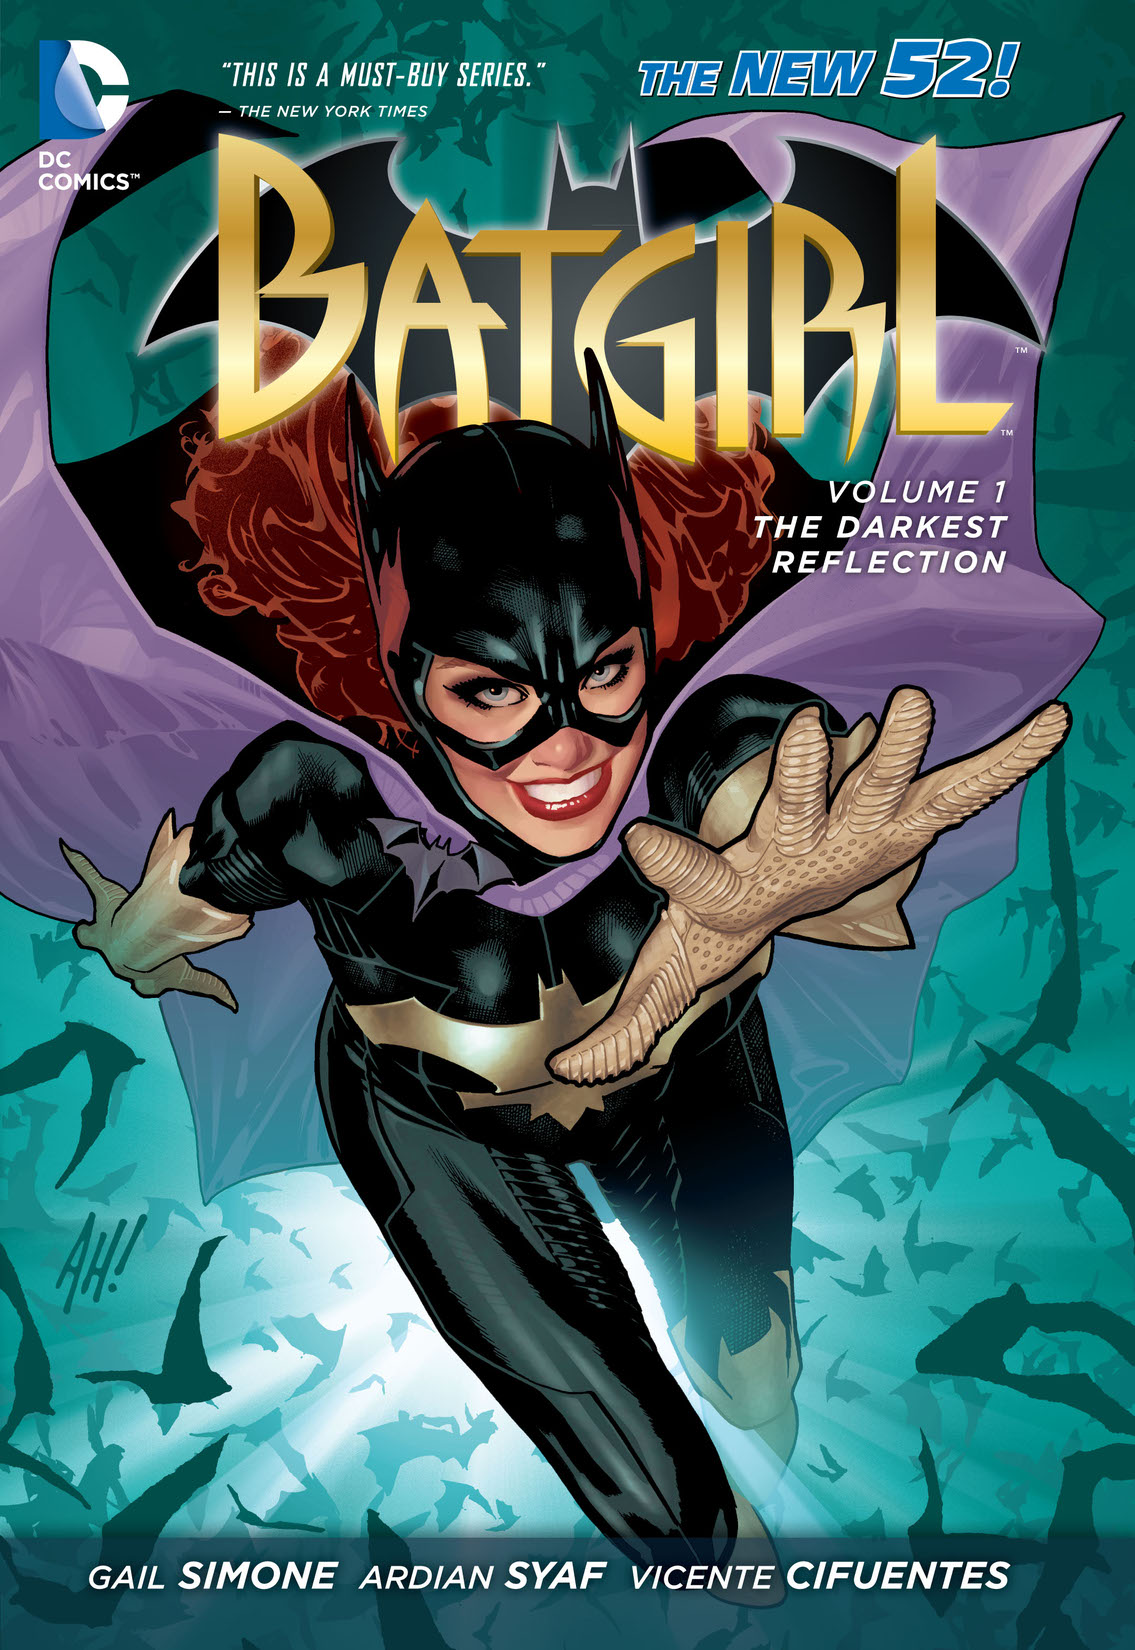 Batgirl Vol. 1: The Darkest Reflection preview images